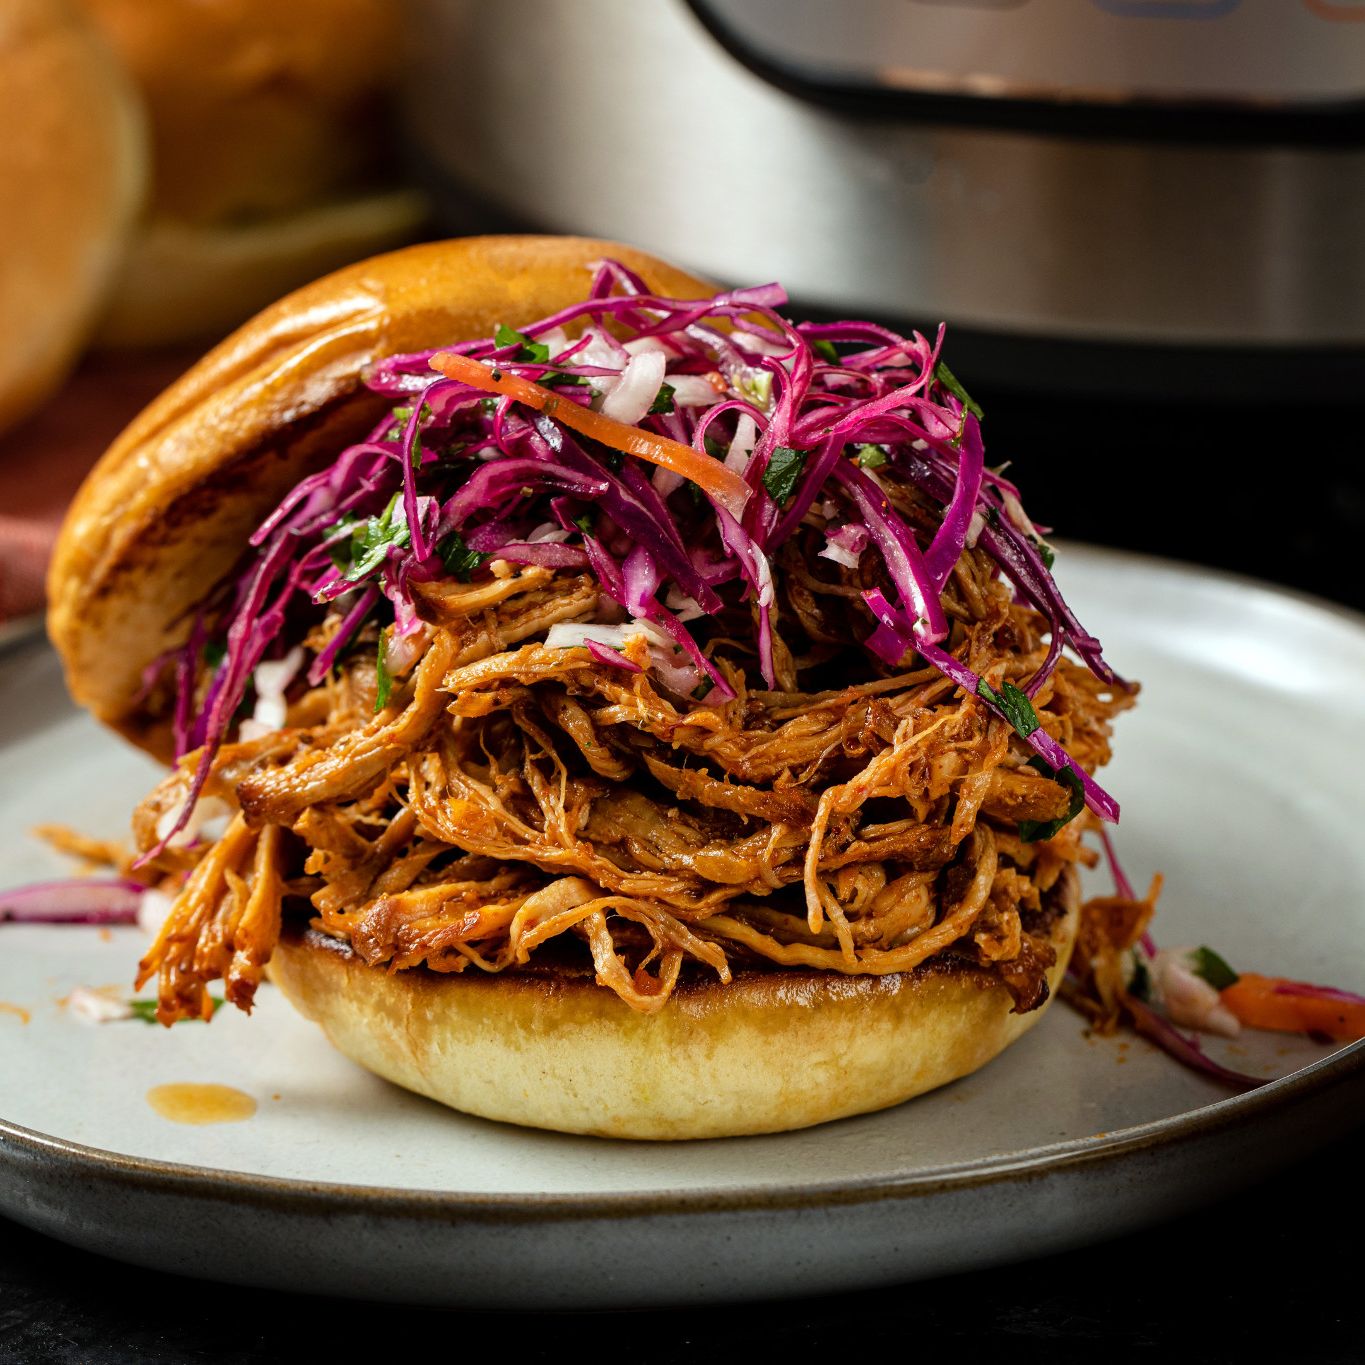 Pulled Pork Side Dishes Ideas / To serve, pile the pork on ...